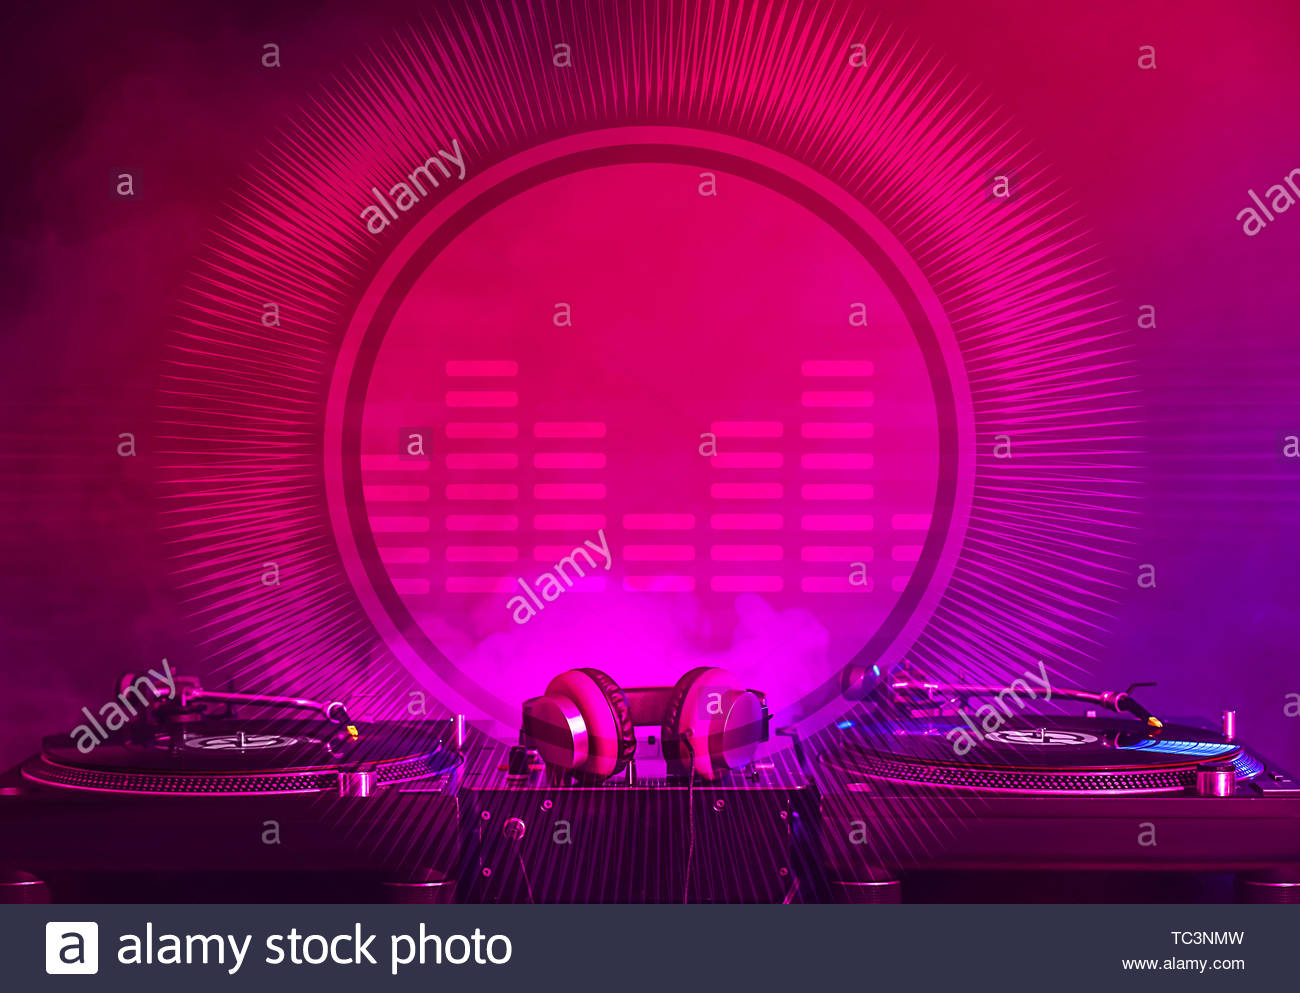 Modern Dj Mixer On Color Background Stock Photo